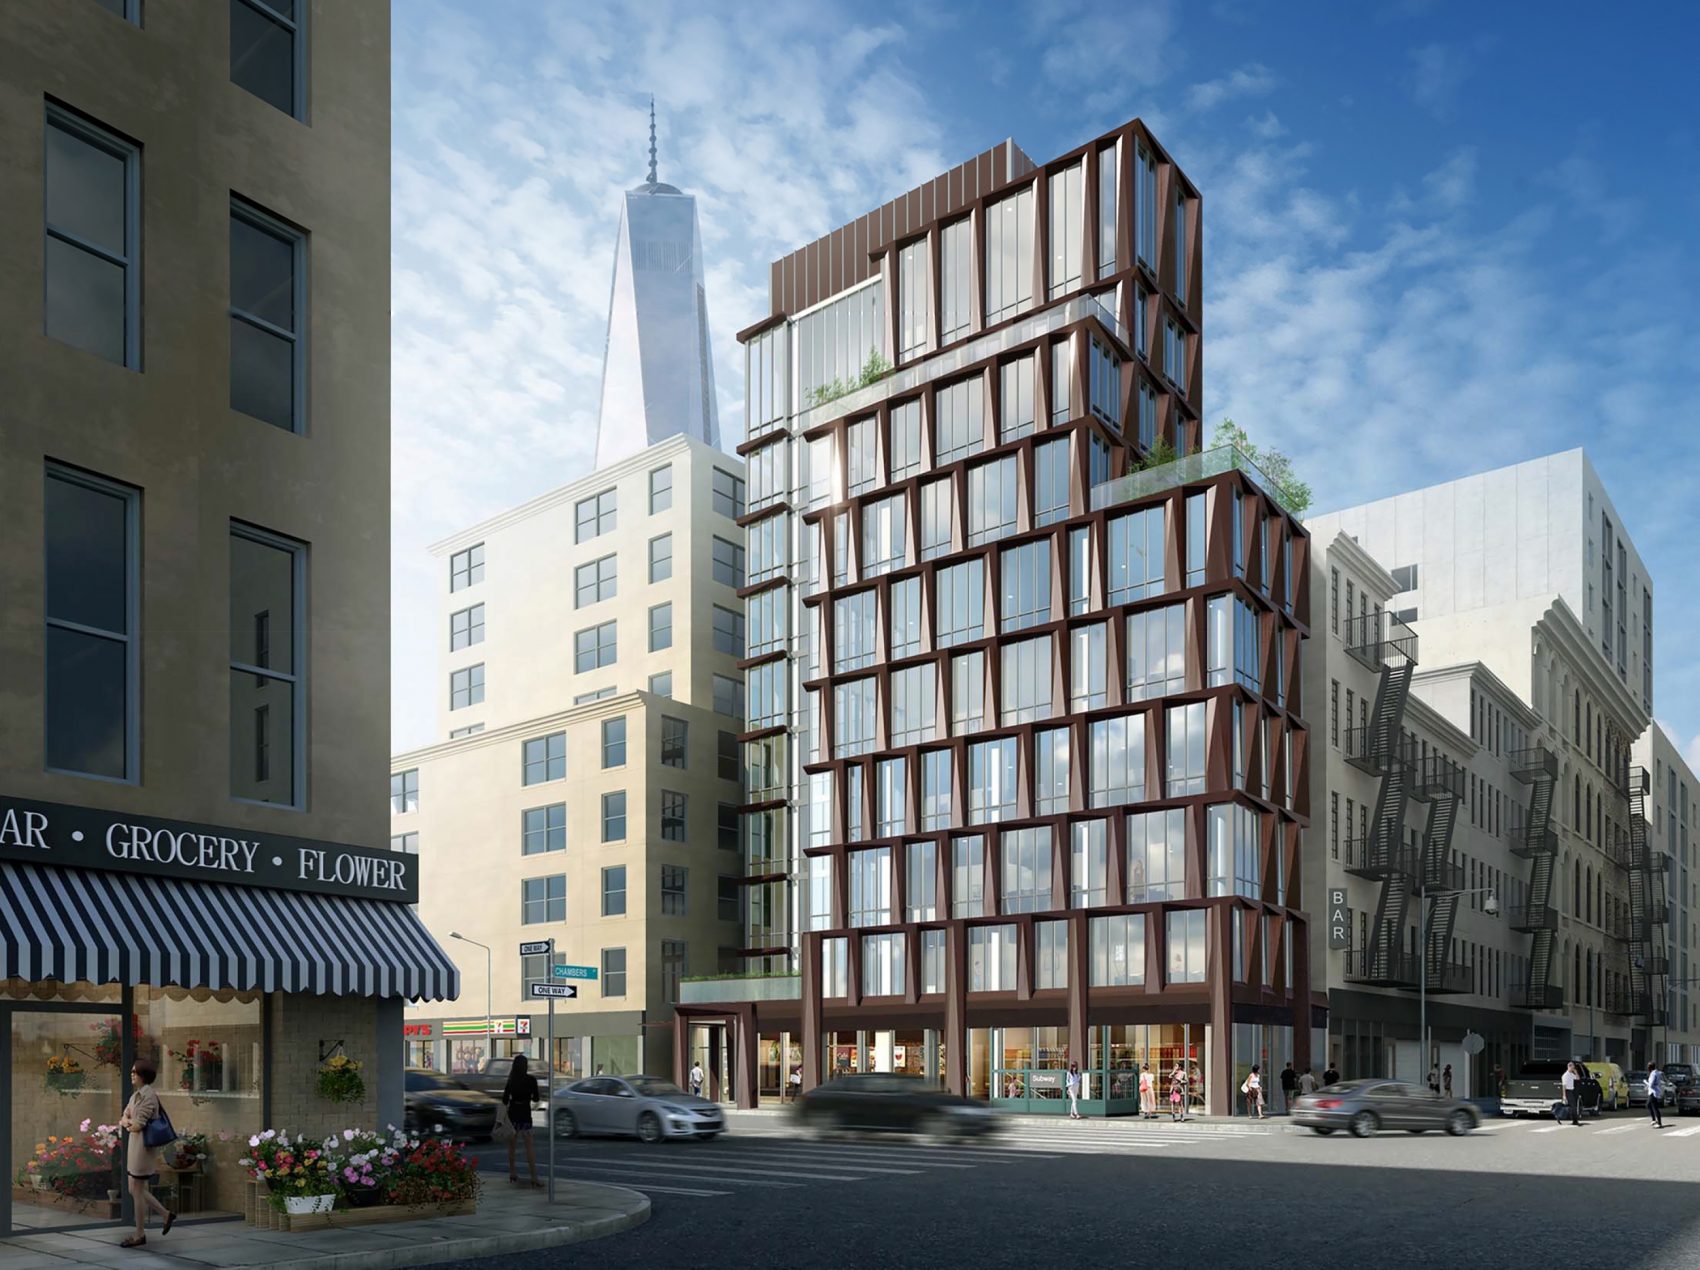 New Rendering of 10-Story Mixed-Use Project Planned at 108 